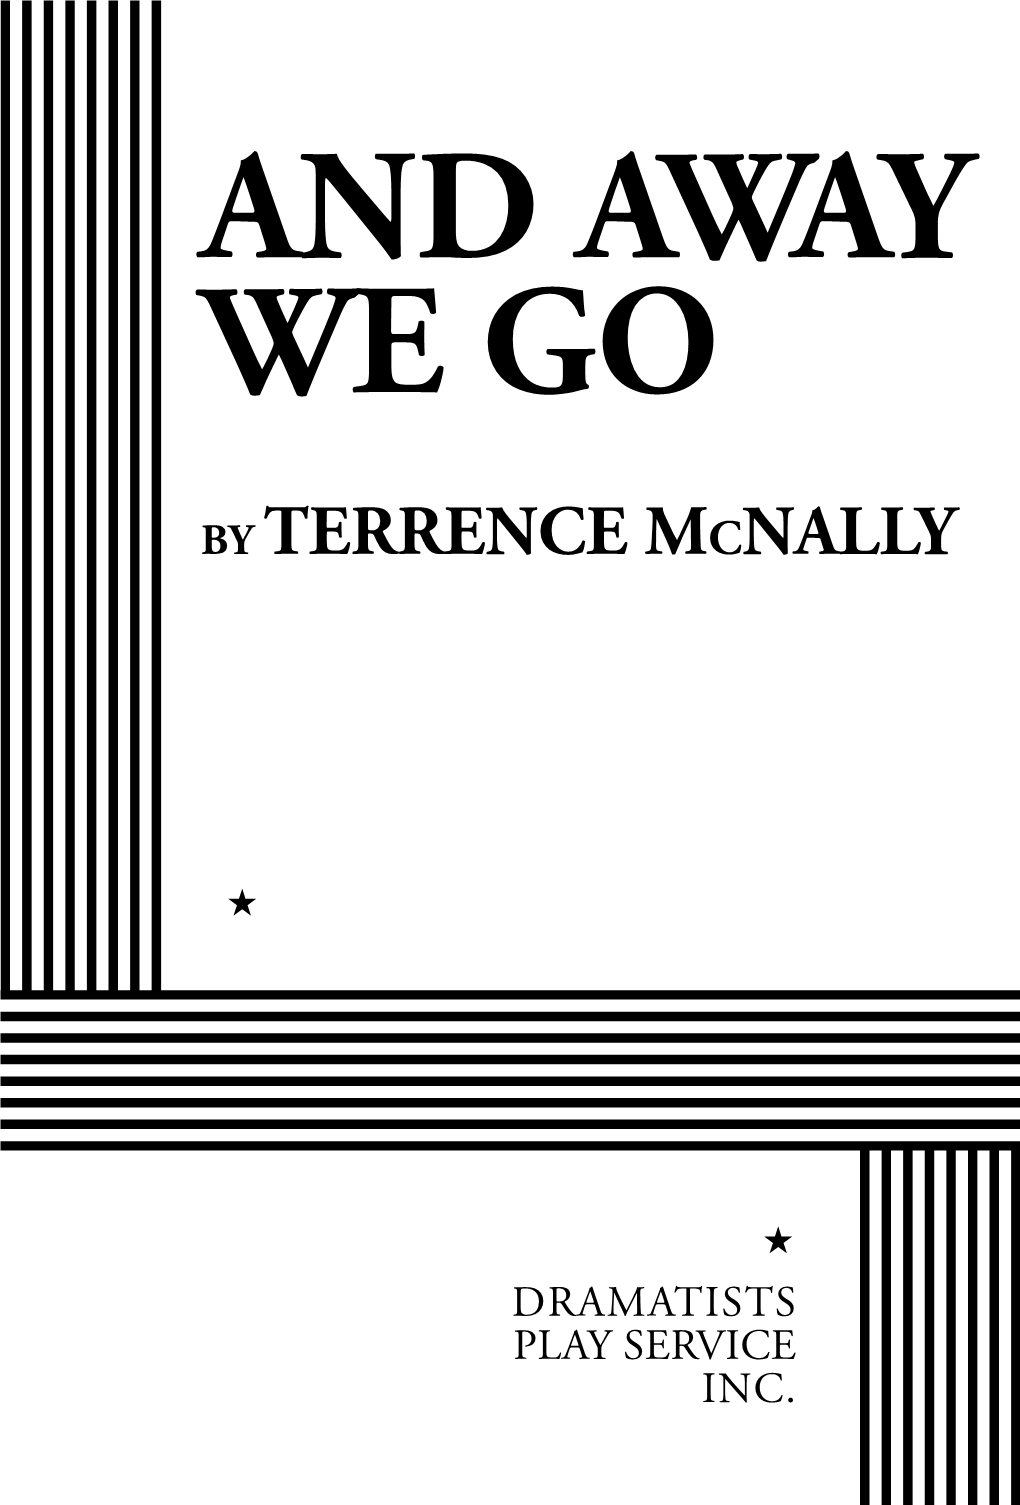 AND AWAY WE GO by Terrence Mcnally